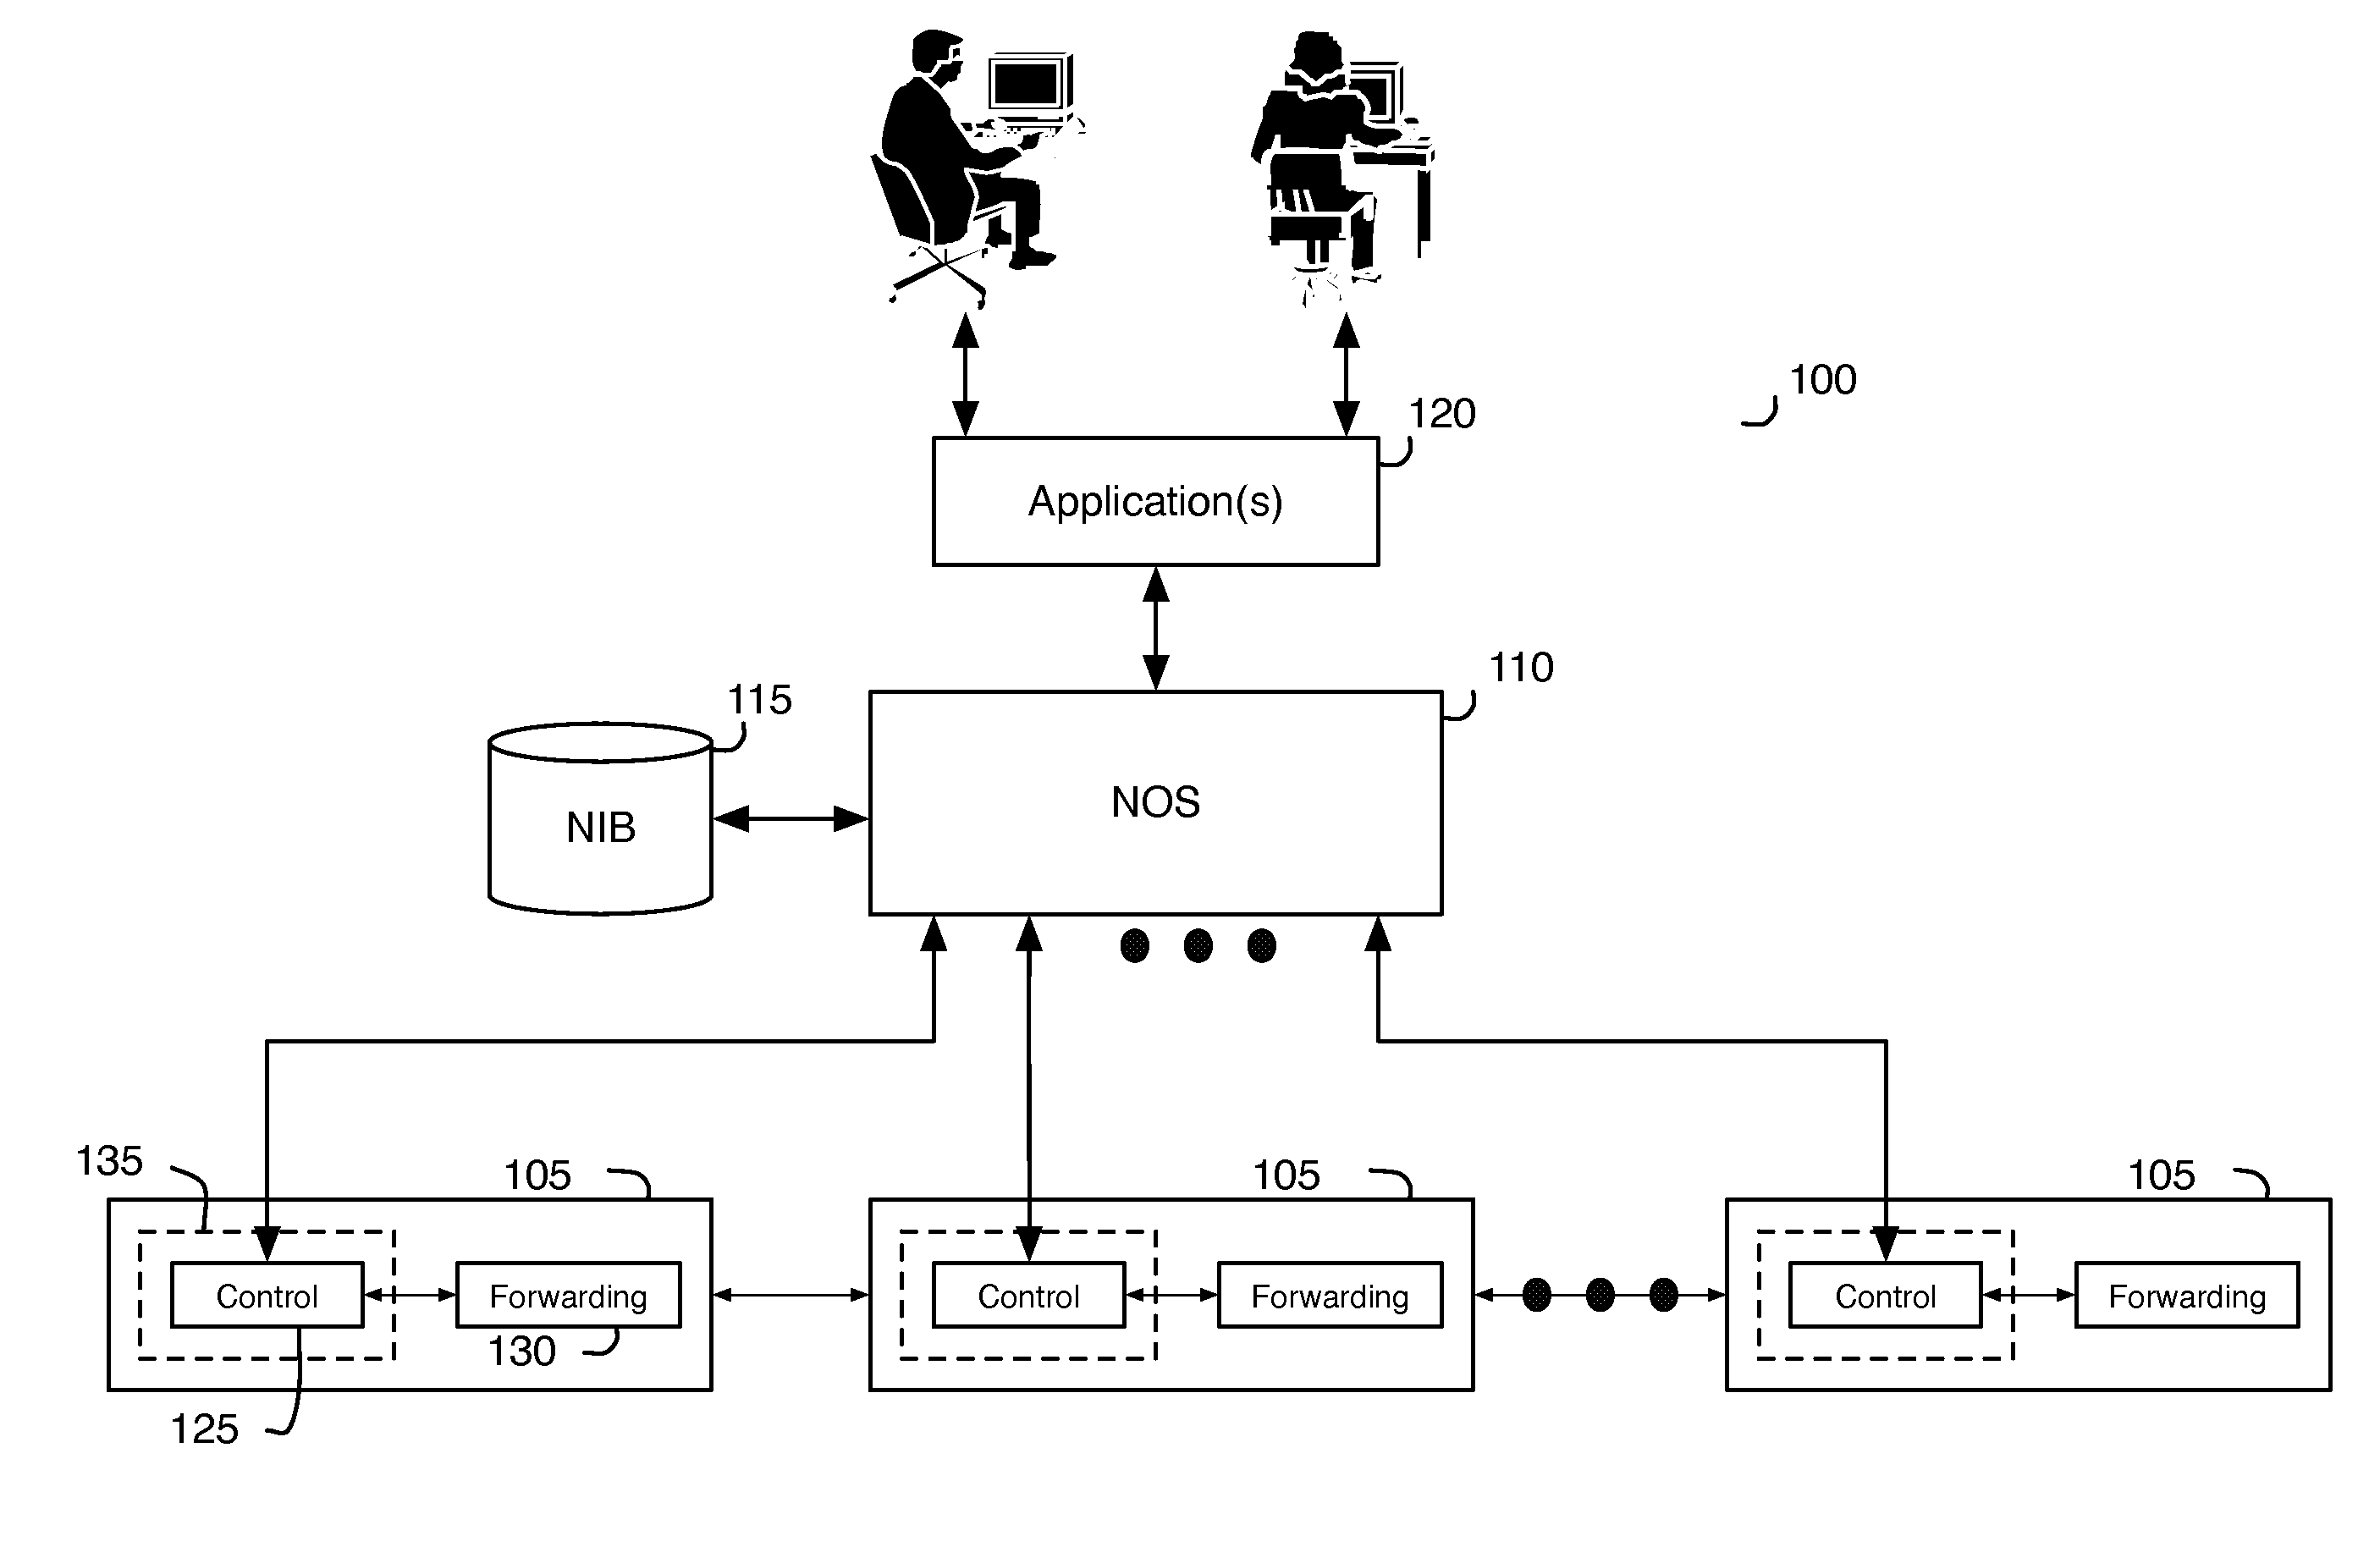 Network control apparatus and method with quality of service controls